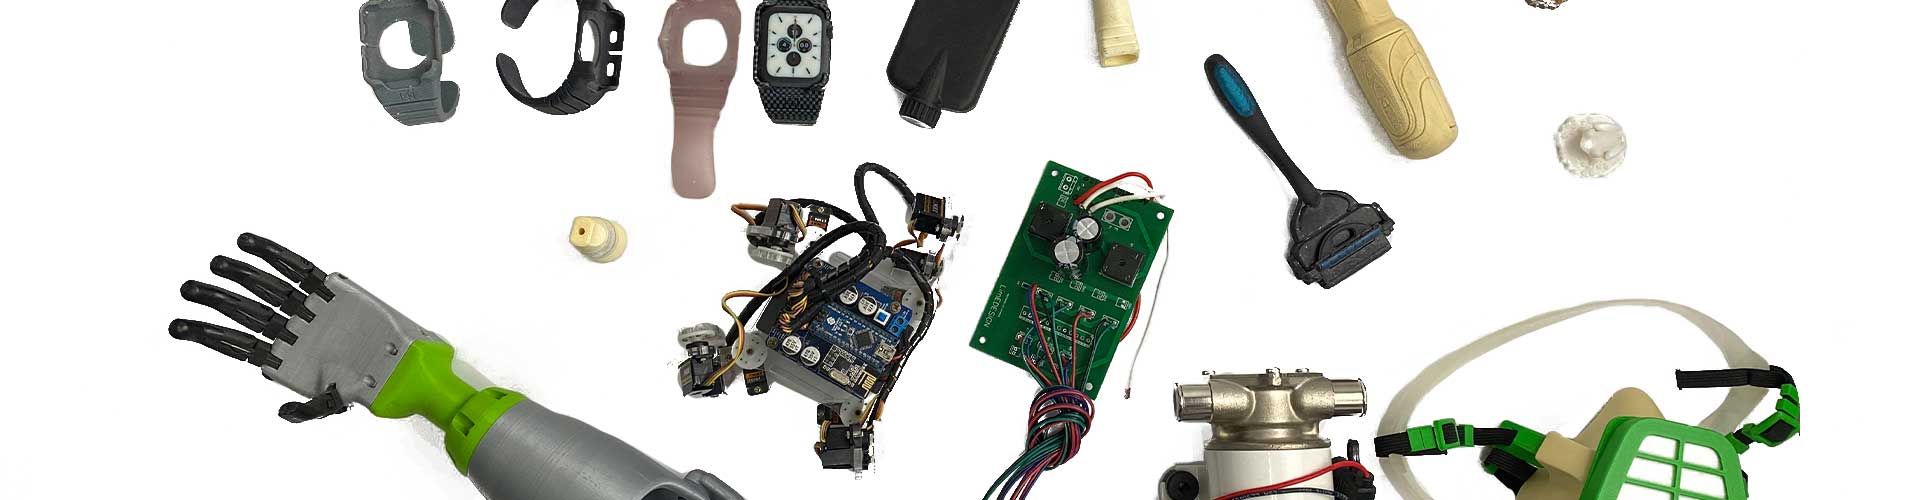 various electrical and plastic prototypes